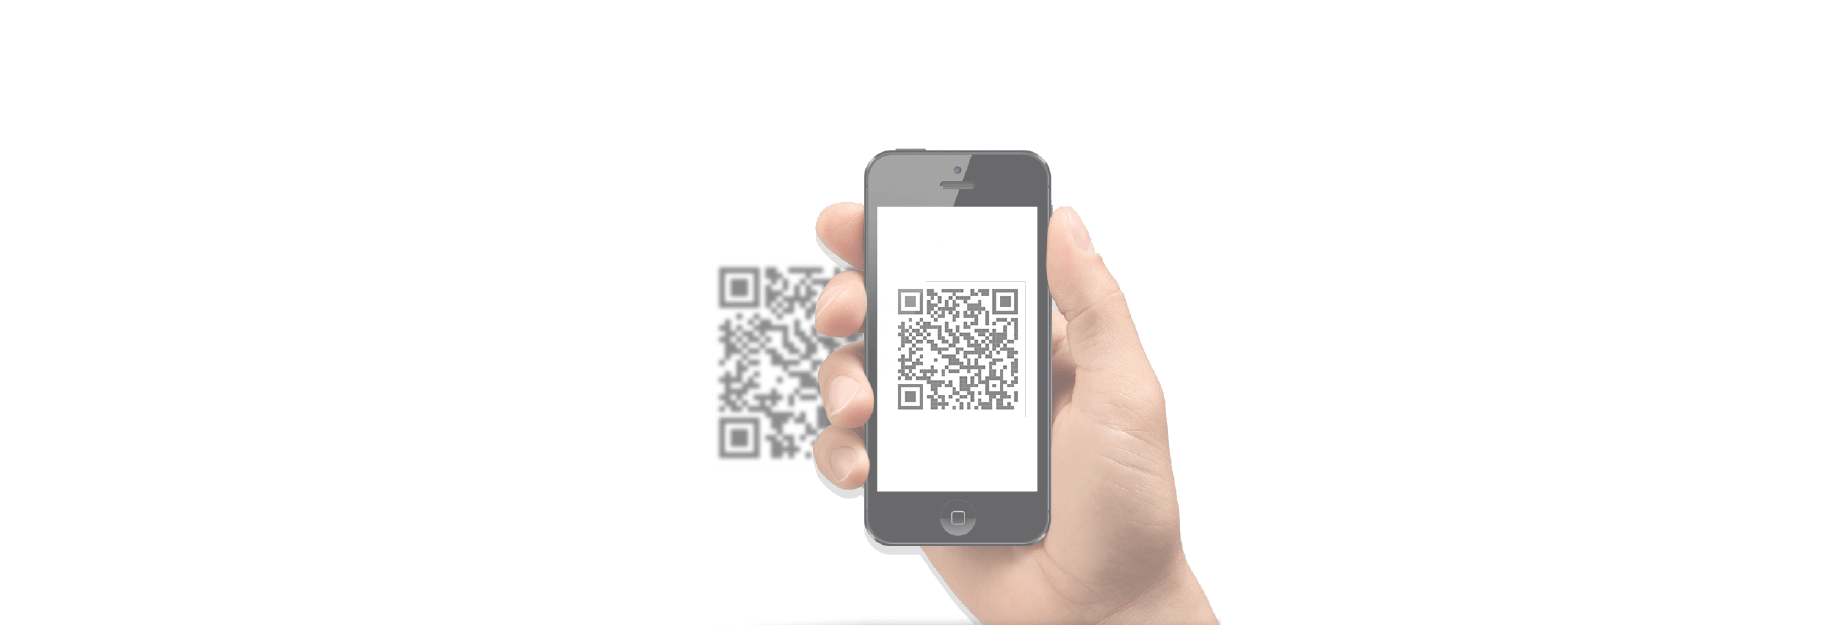 How to manually scan QR codes with iPhone or iPad via the Control Center shortcut